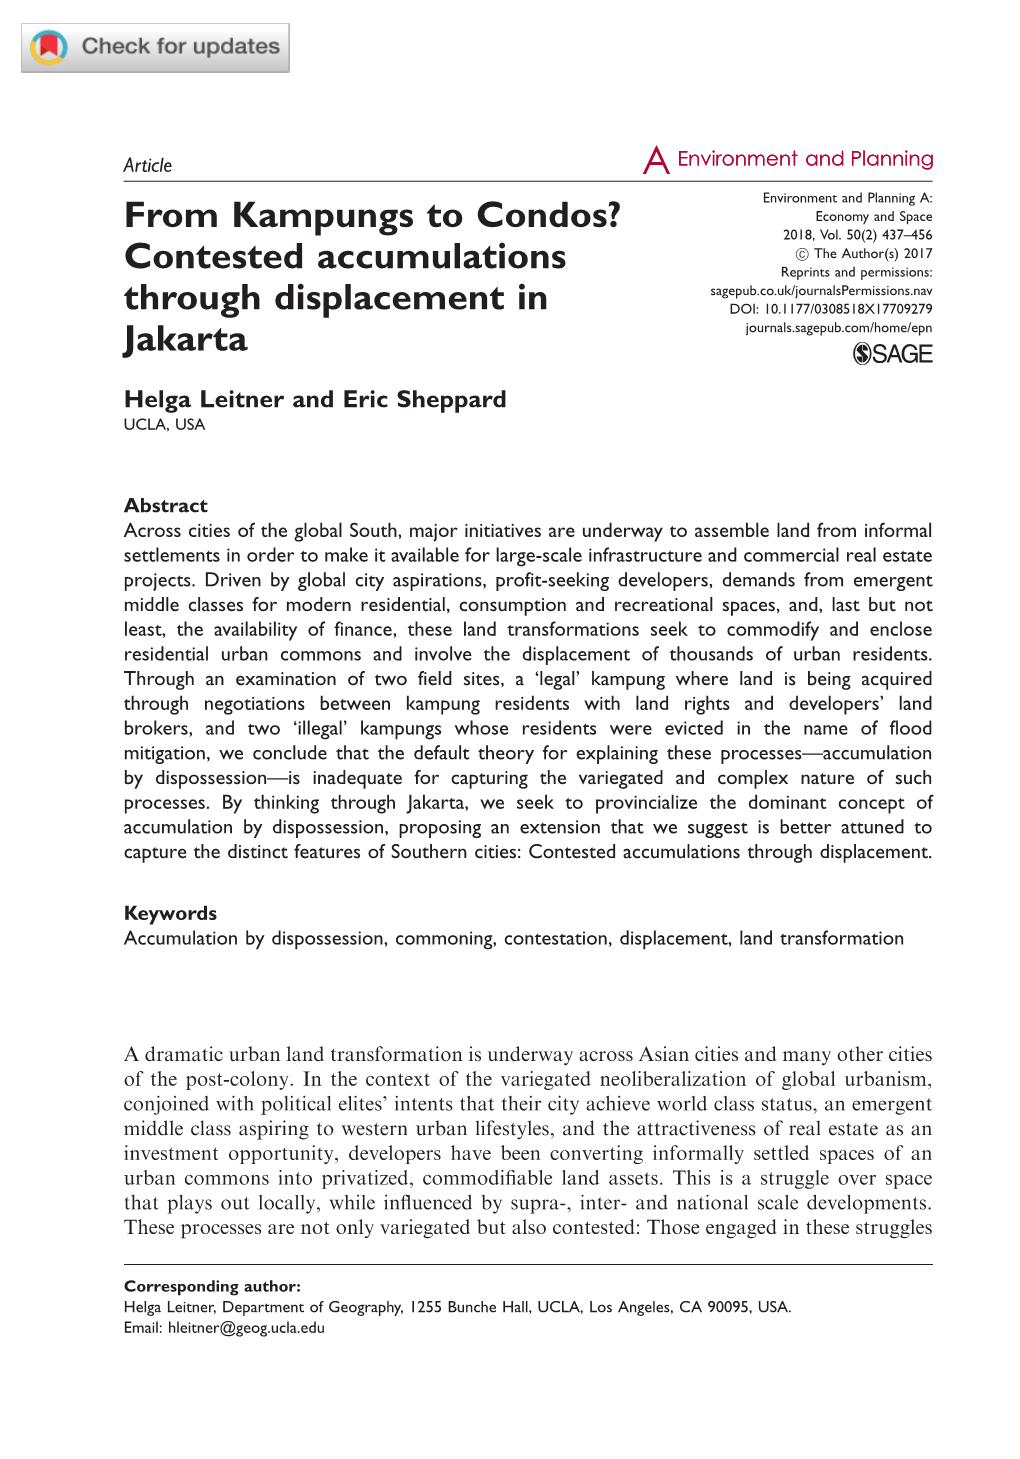 From Kampungs to Condos? Contested Accumulations Through Displacement in Jakarta